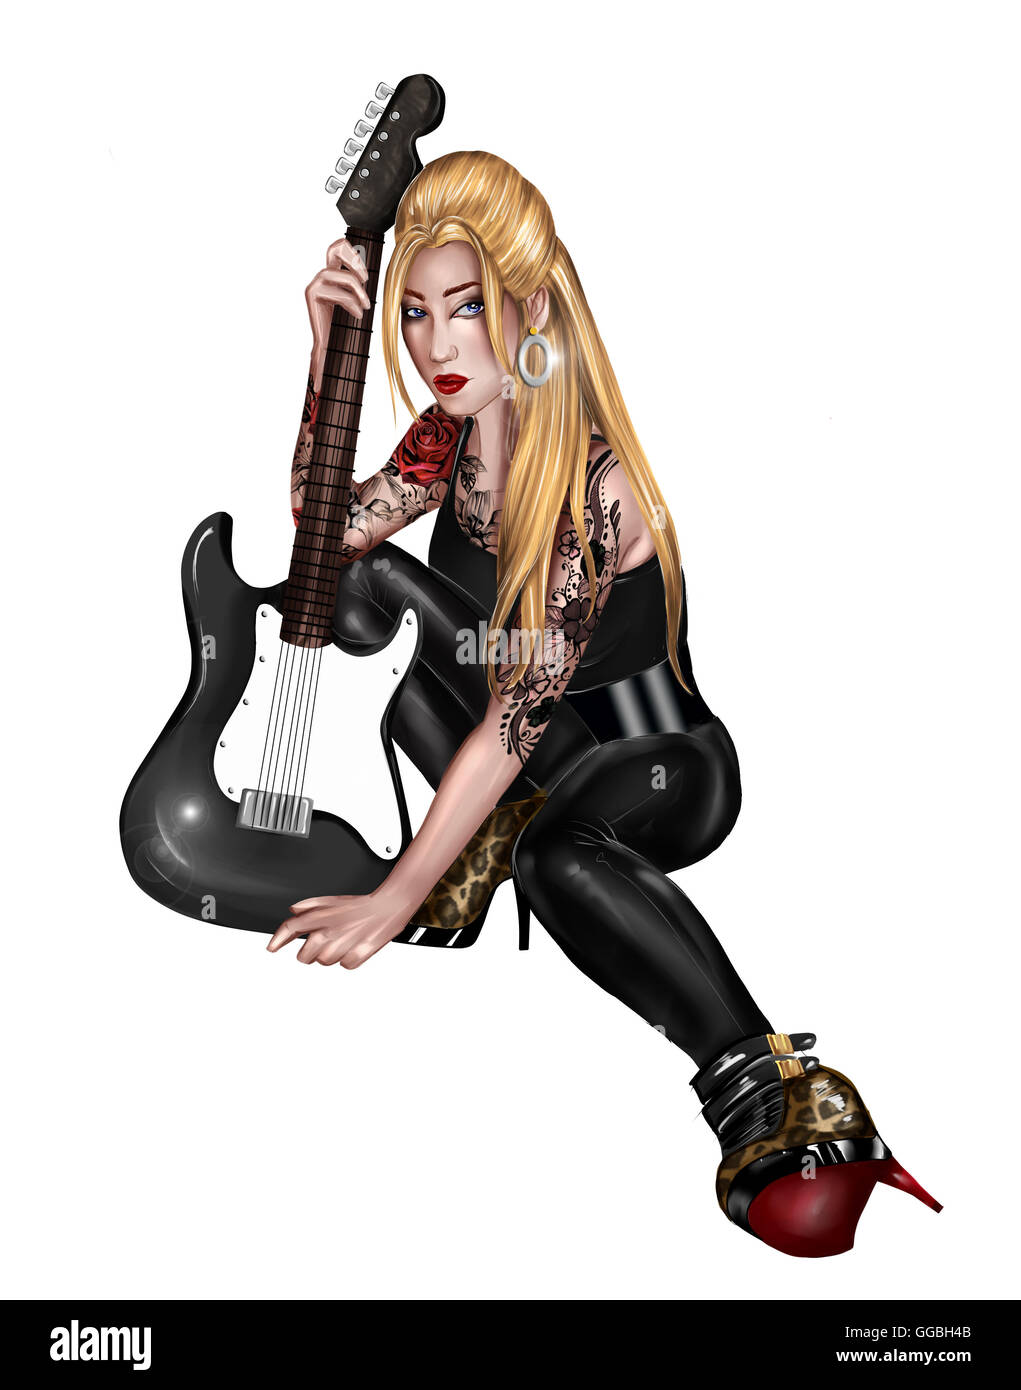 DIGITAL ILLUSTRATION OF A BEAUTIFUL GIRL WITH ELECTRIC GUITAR Stock Photo